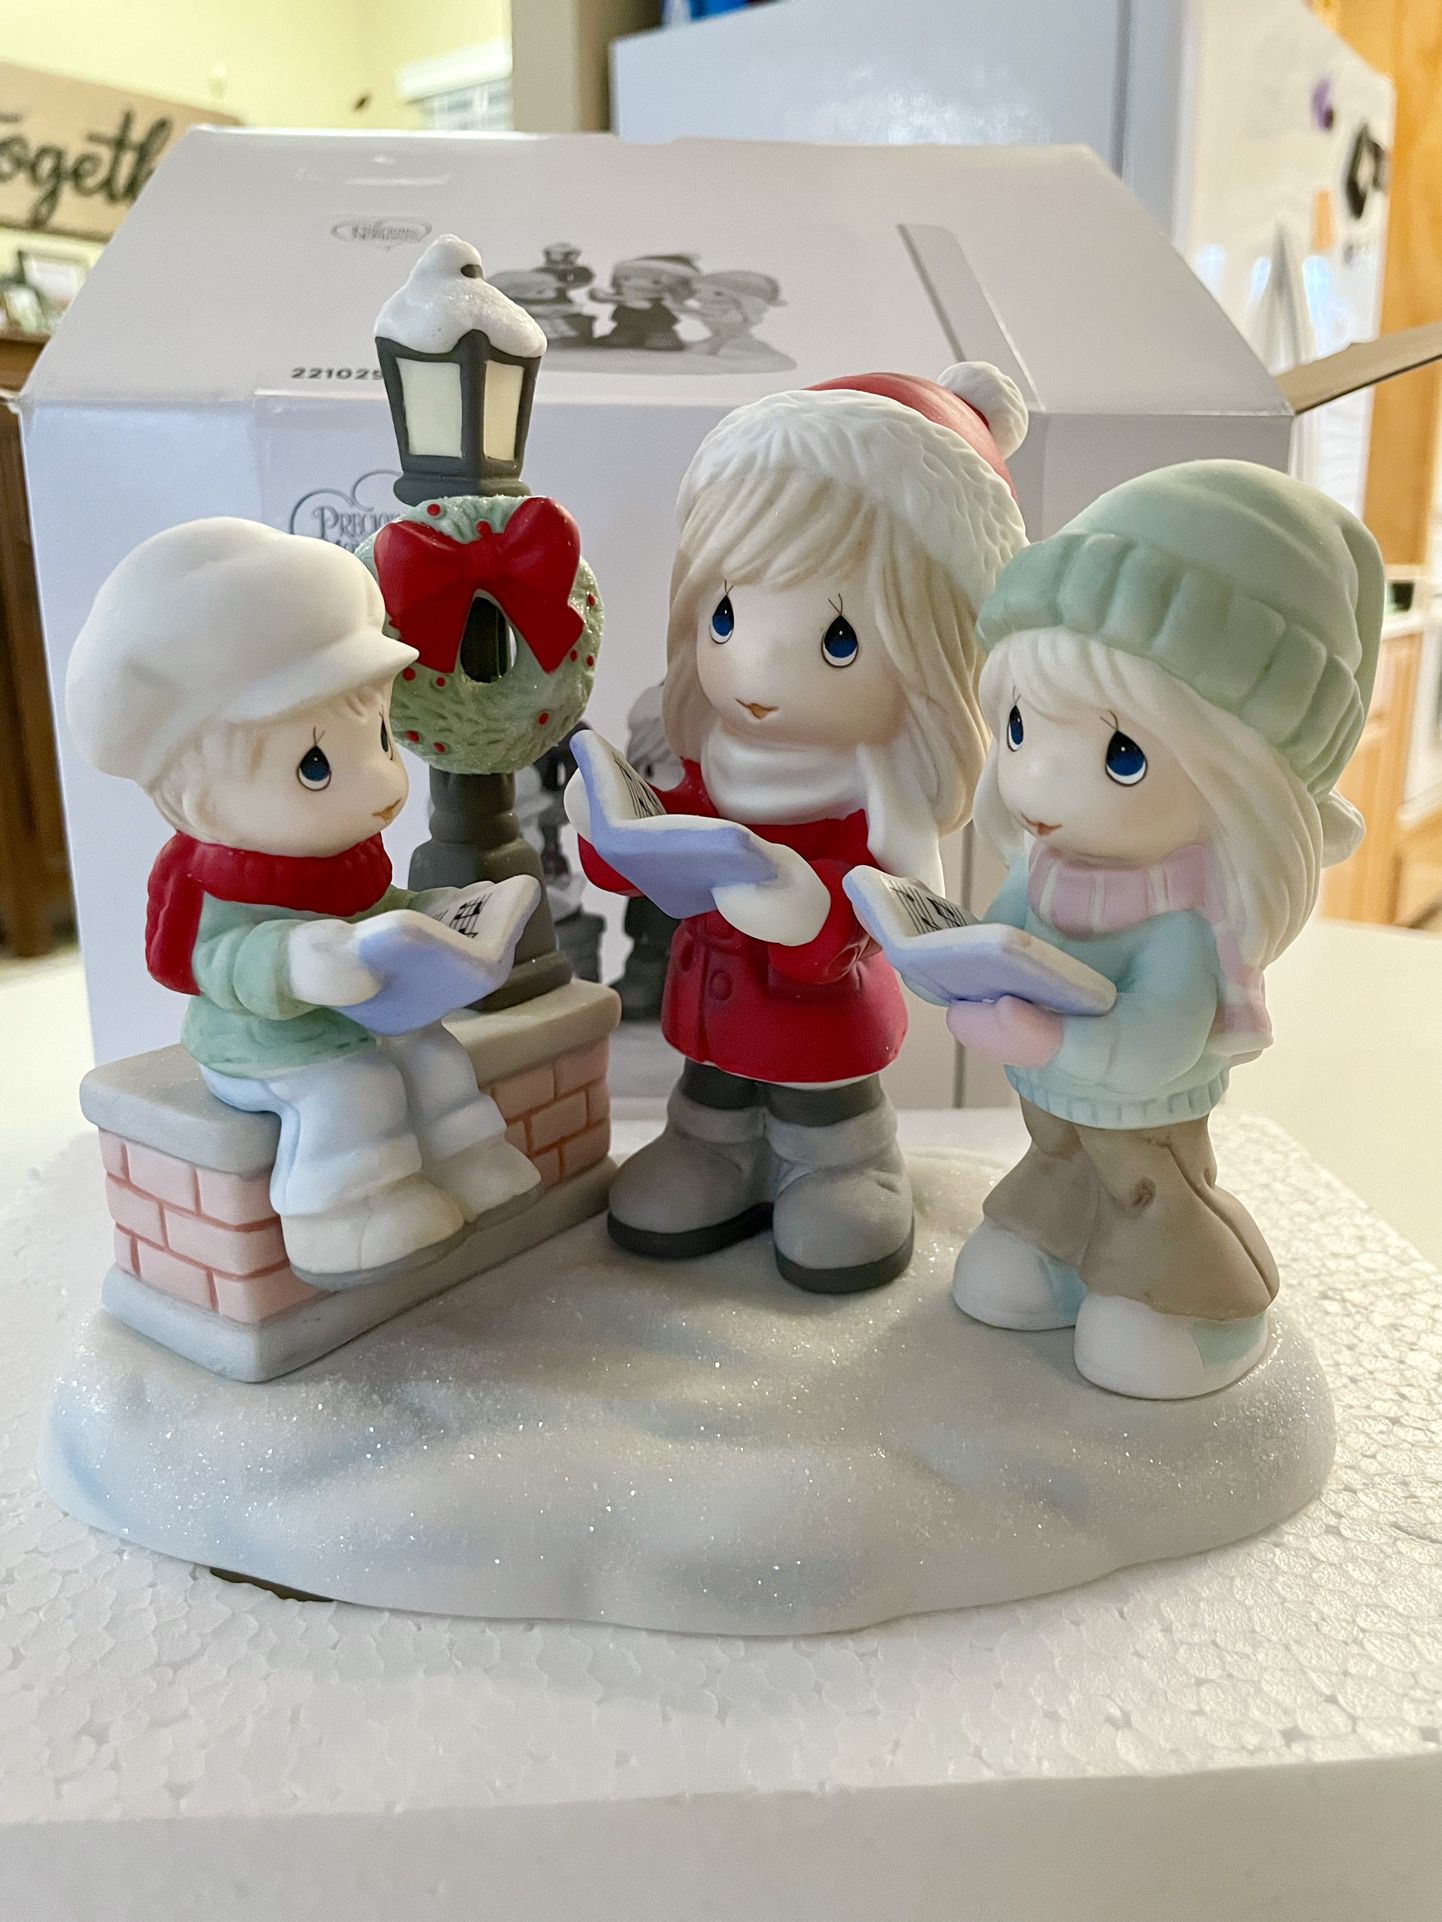 Precious Moments Here We Come A-Caroling Limited Edition Figurine 221029